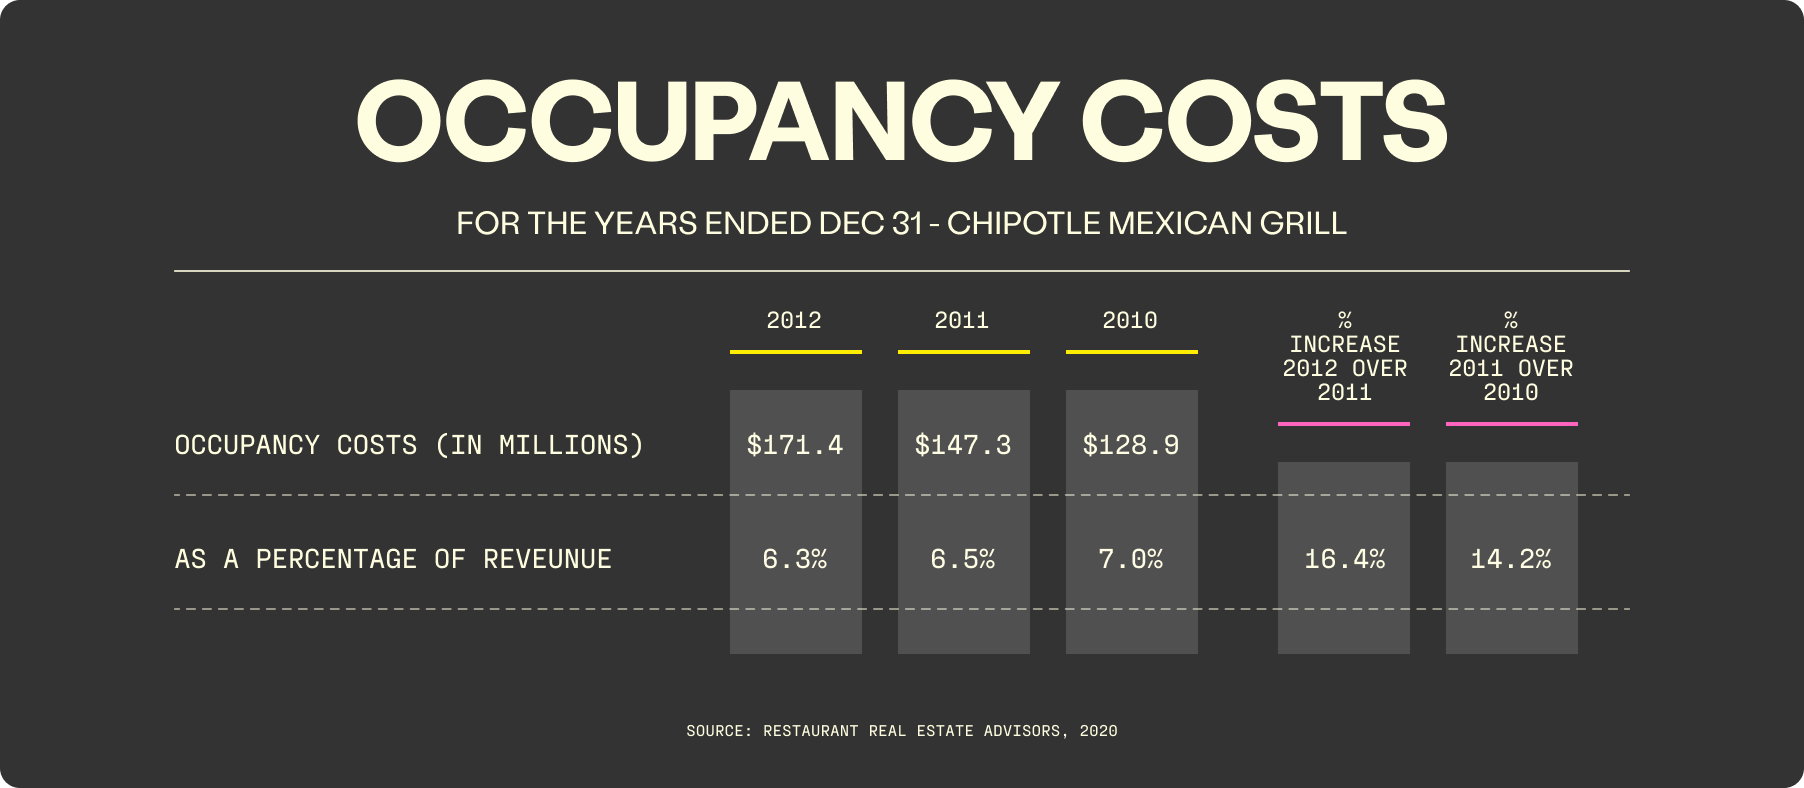 Chipotle Mexican Grill’s Form 10 K shows its occupancy costs are equal to 6.3% of revenue. 